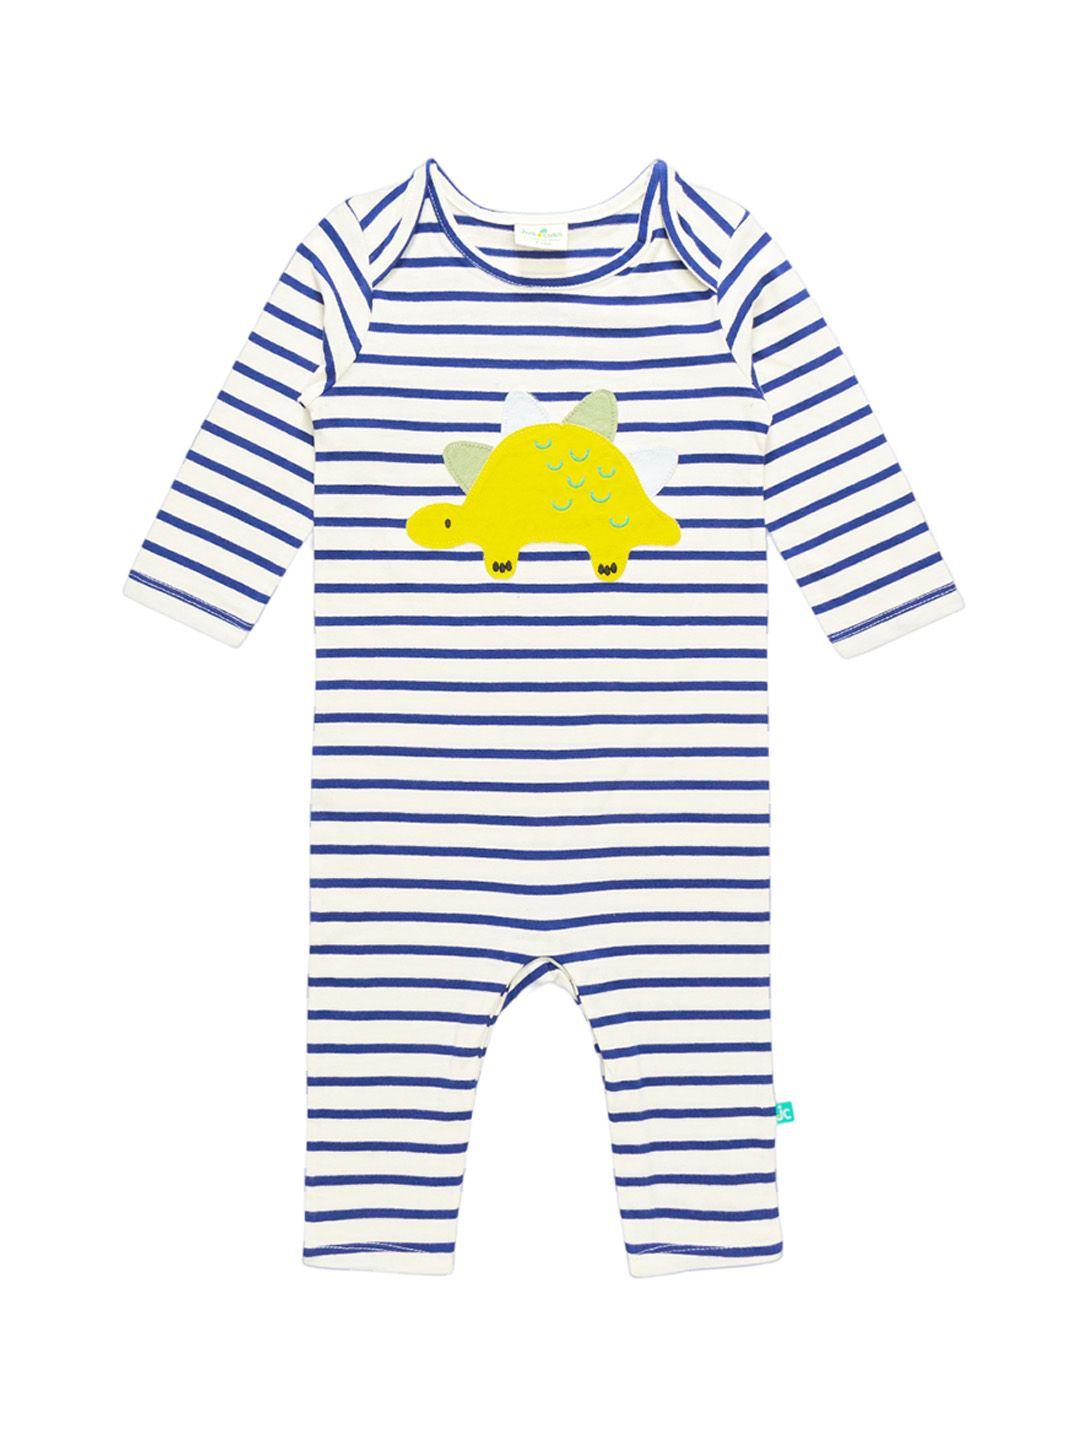 juscubs-infant-boys-striped-pure-cotton-rompers